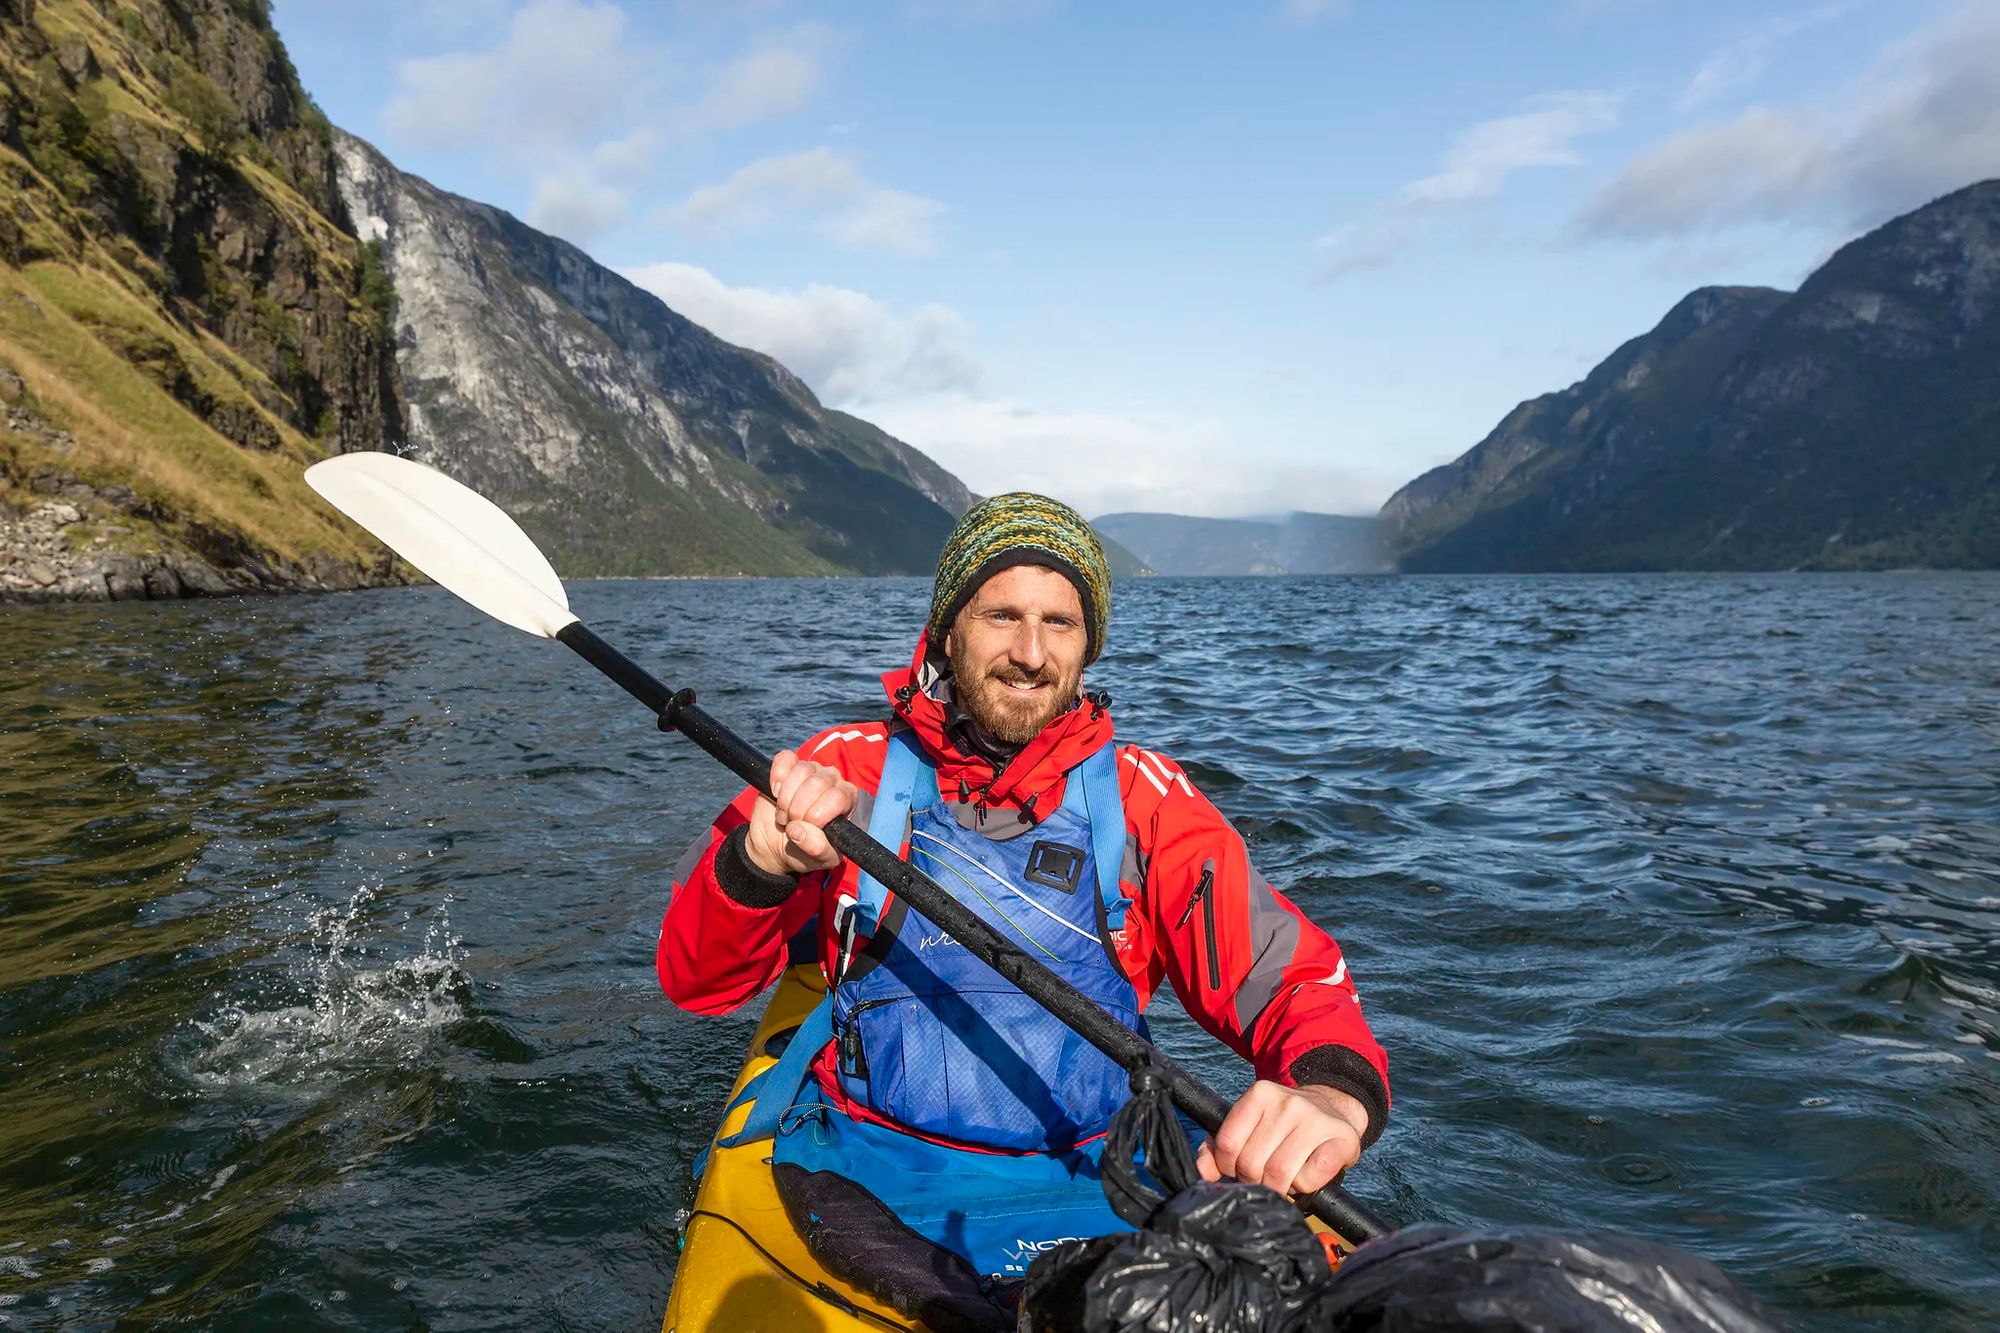 A kayaker on Much Better Adventures' Hike and Kayak the Norwegian Fjords trip.